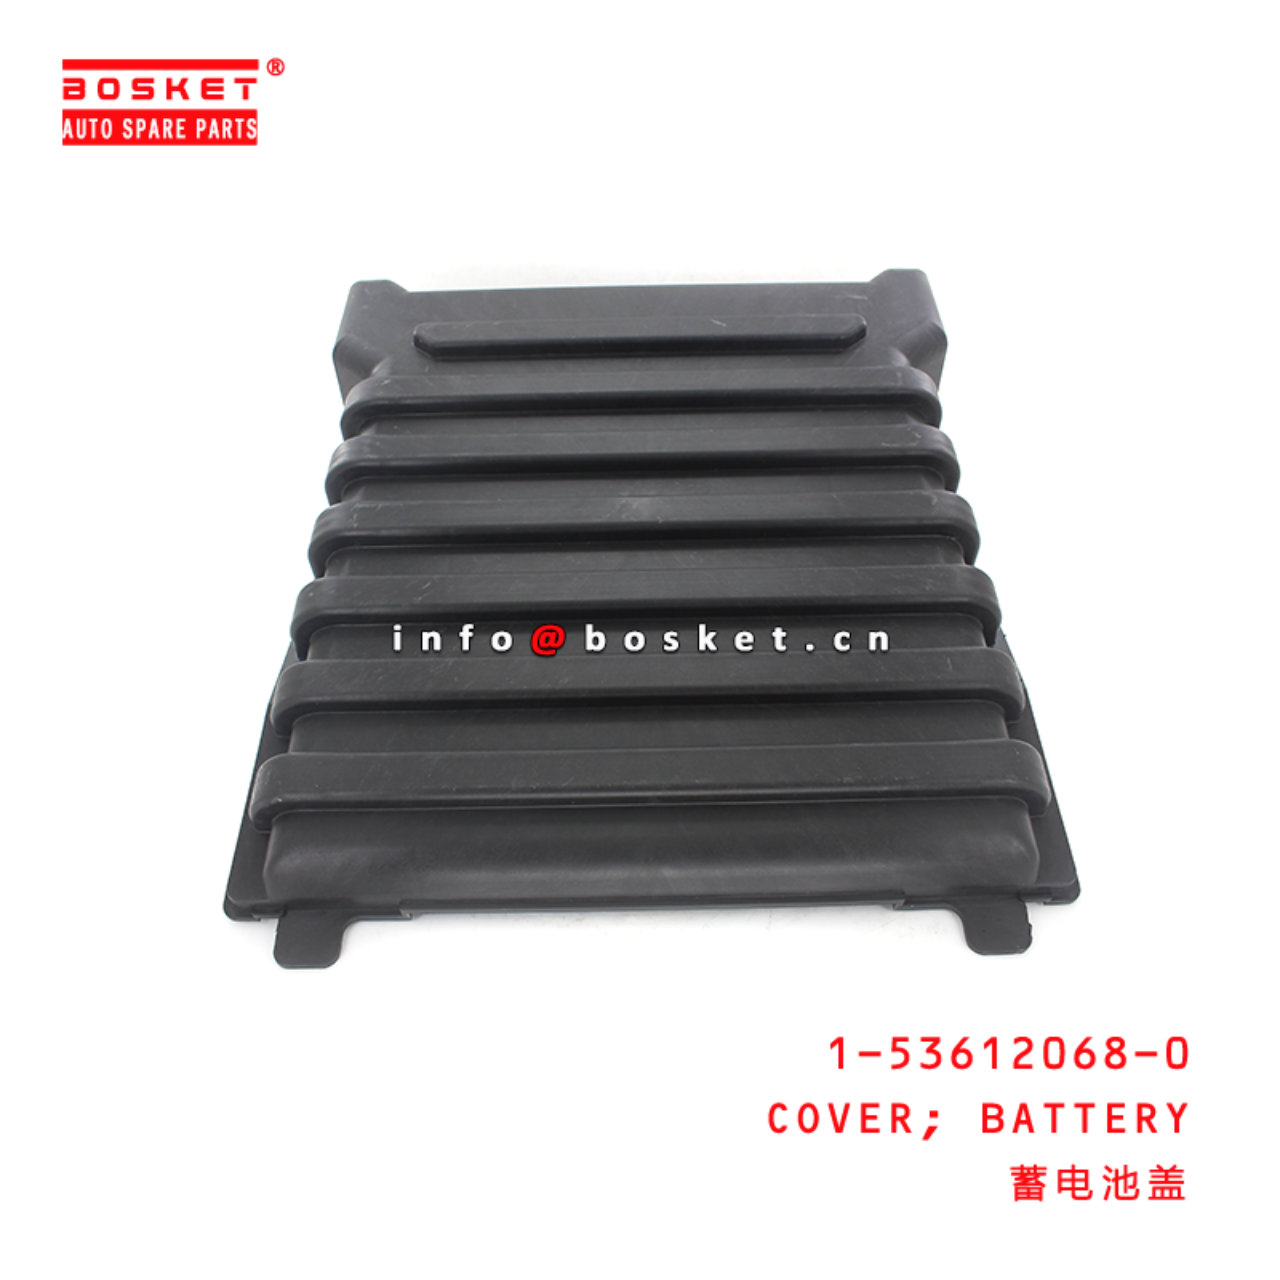 1-53612068-0 Battery Cover Suitable for I SUZU VC46 1536120680